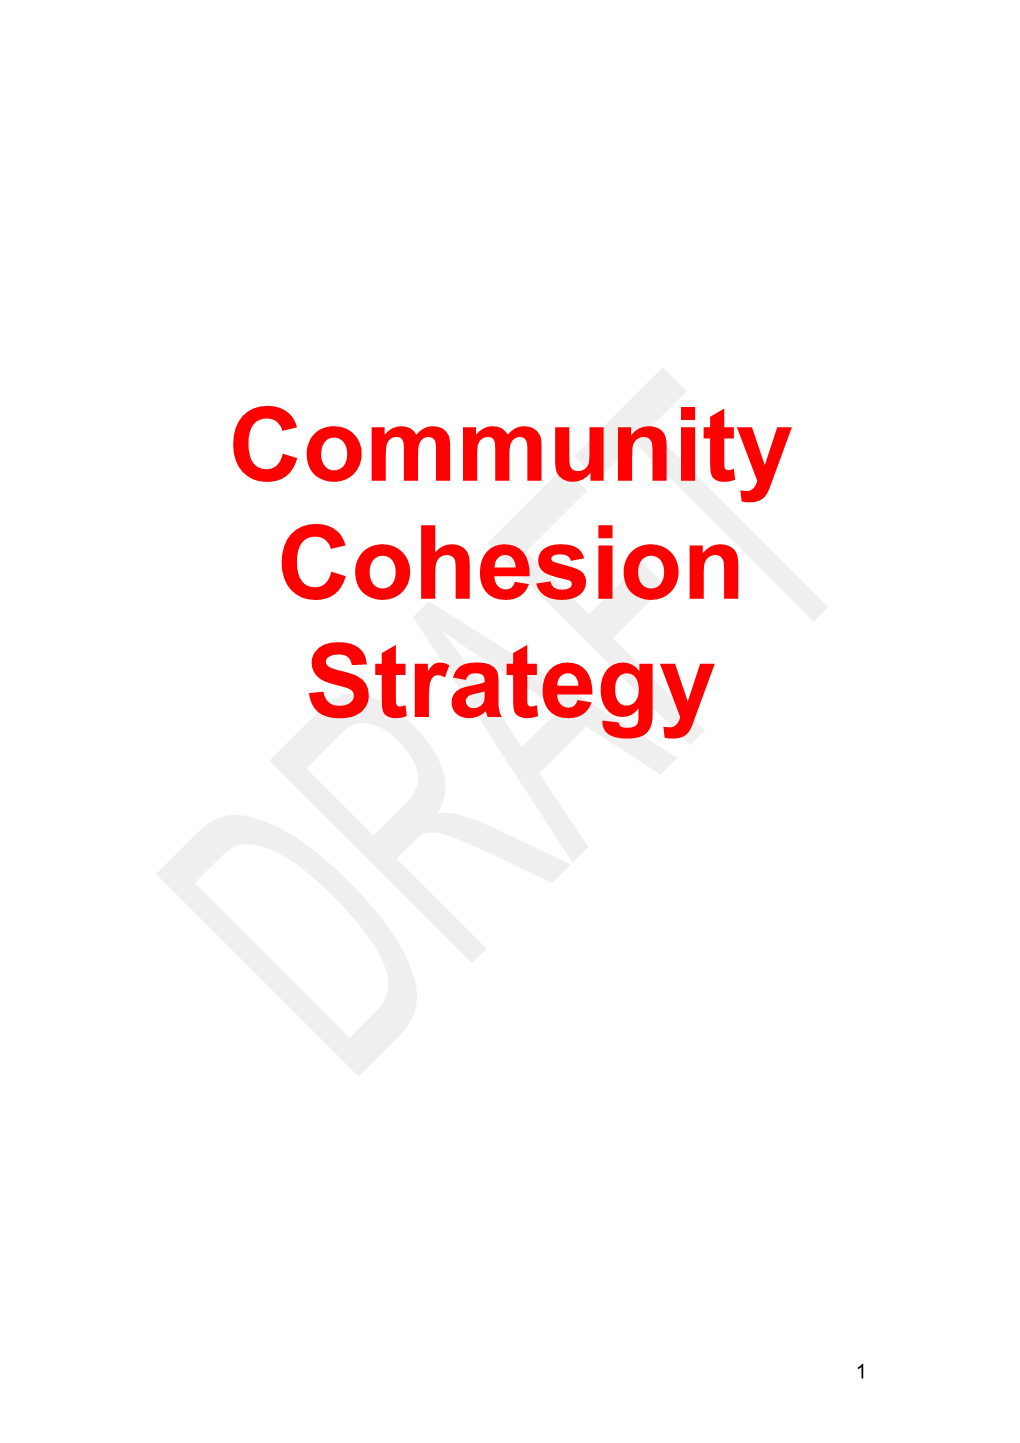 Community Cohesion Strategy